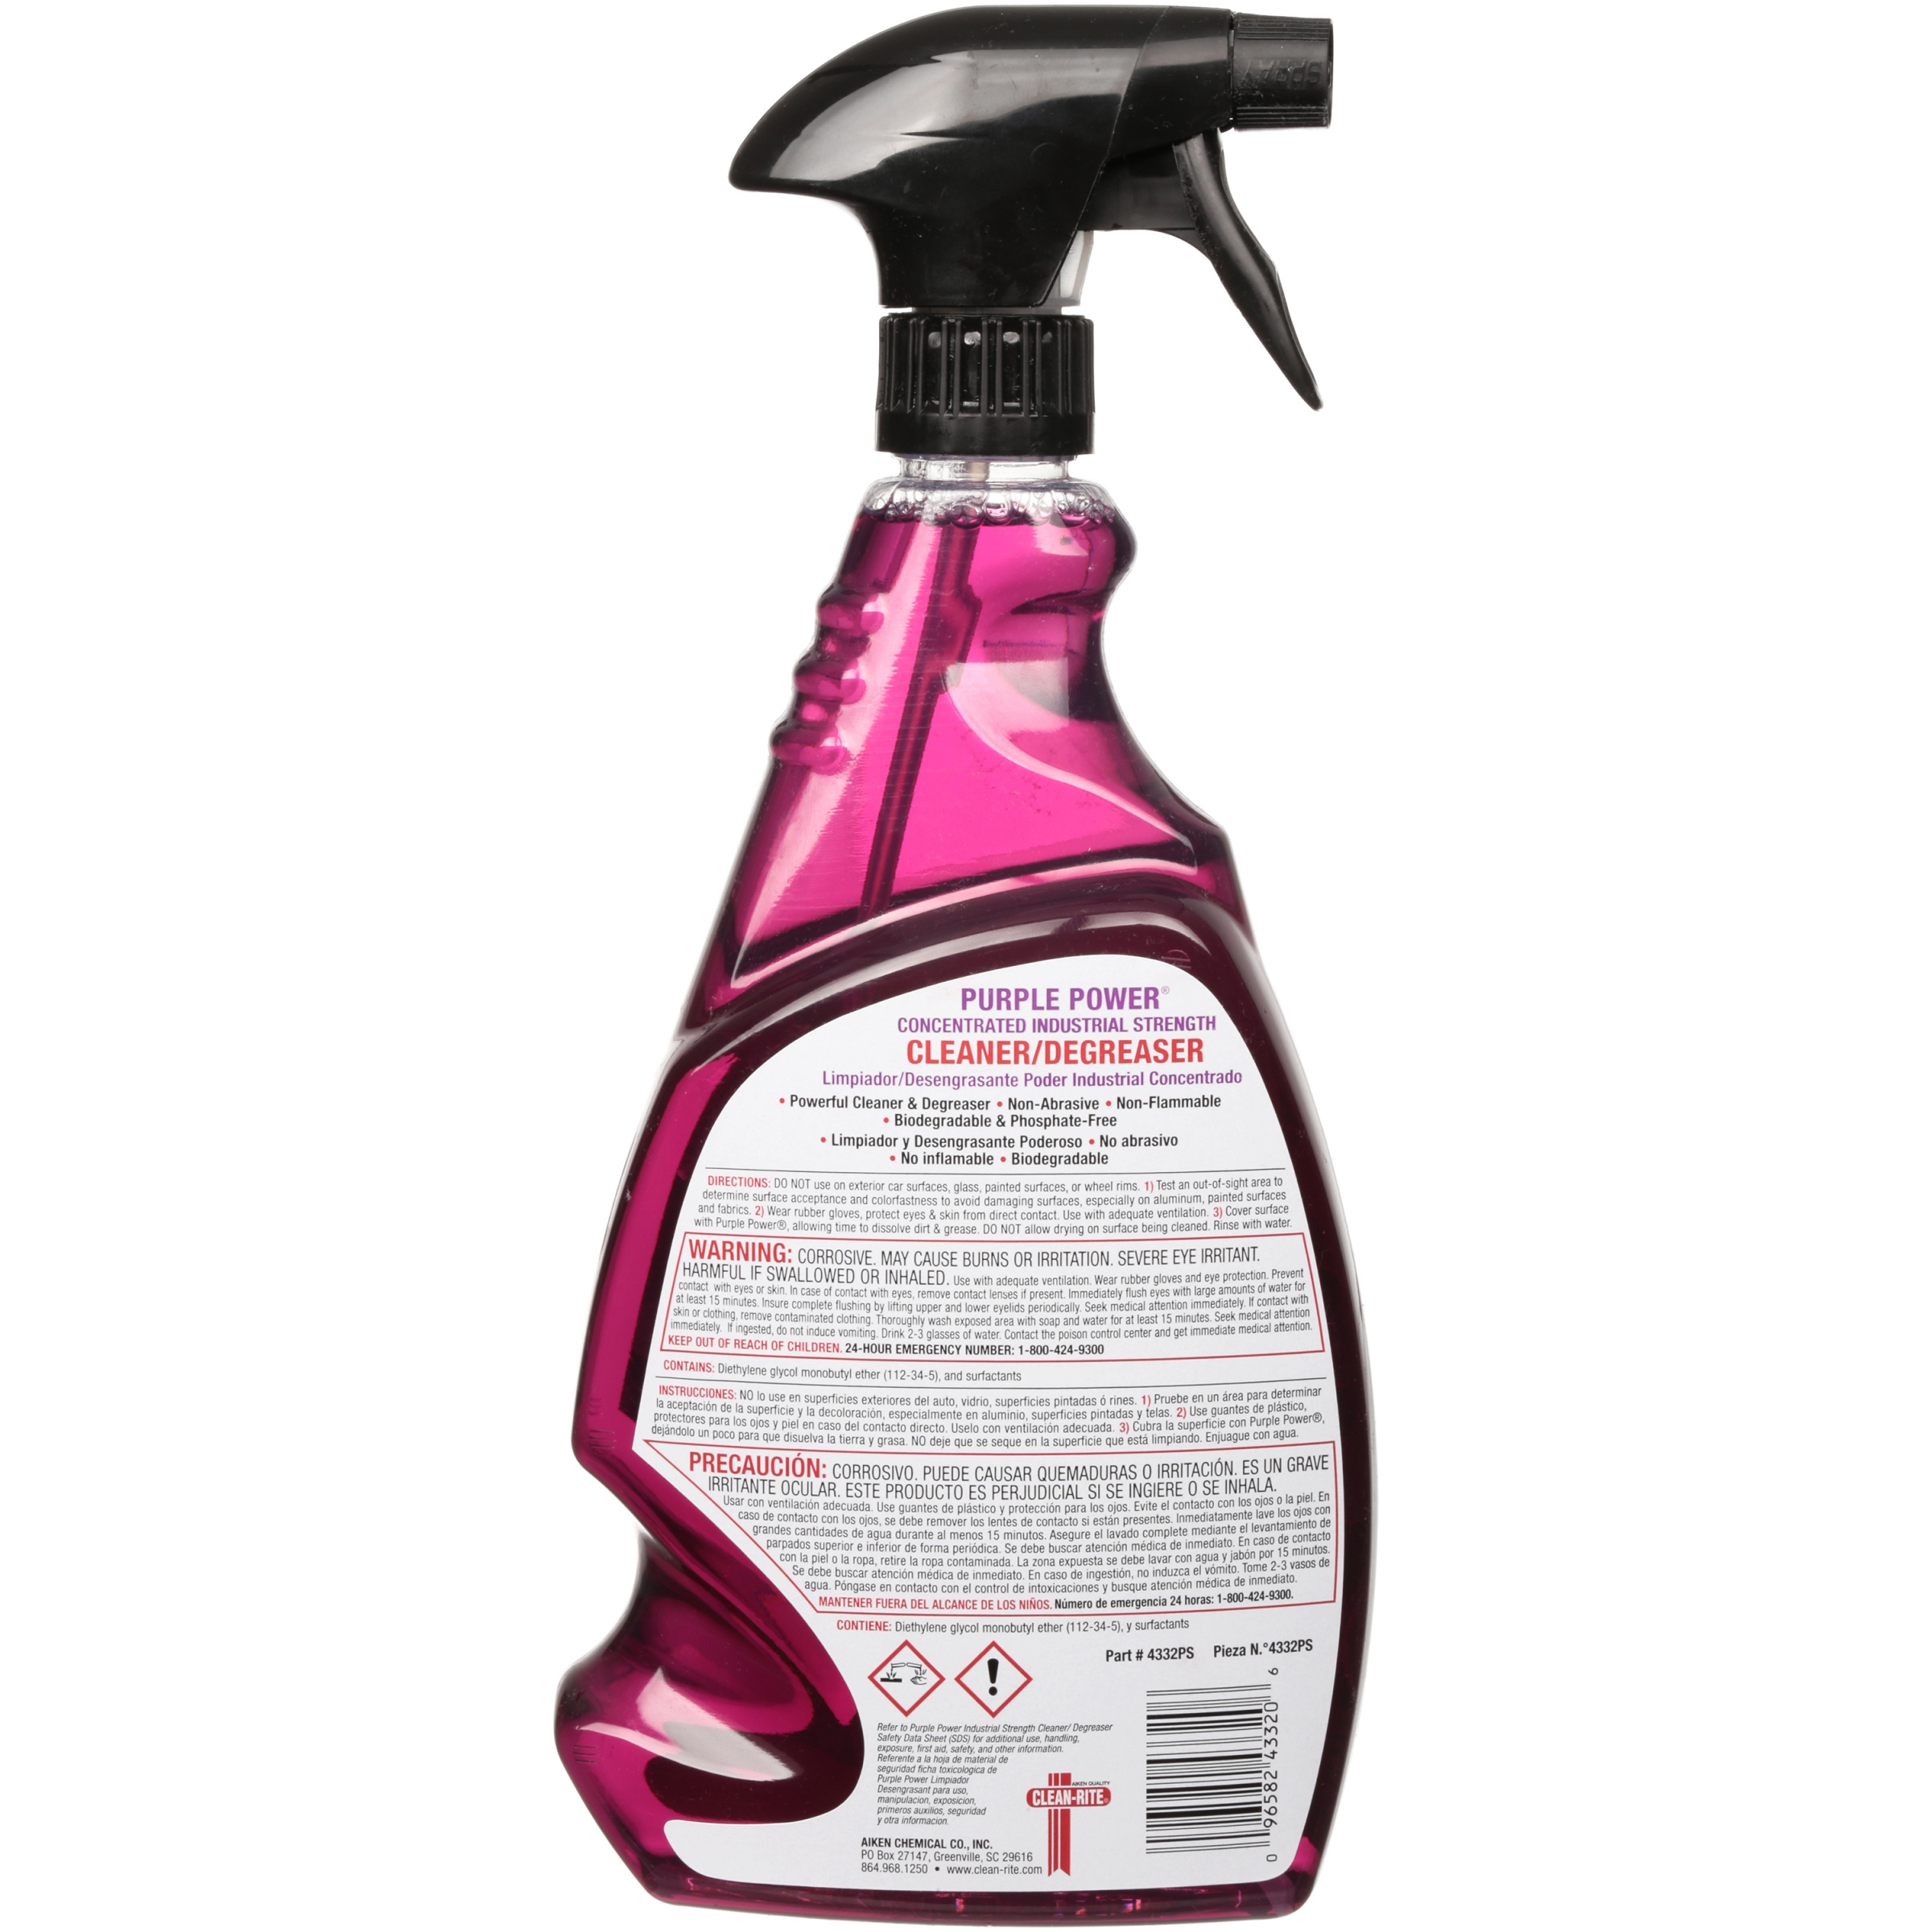 Purple Power Concentrated Industrial Cleaner/Degreaser, 32 oz - image 2 of 2